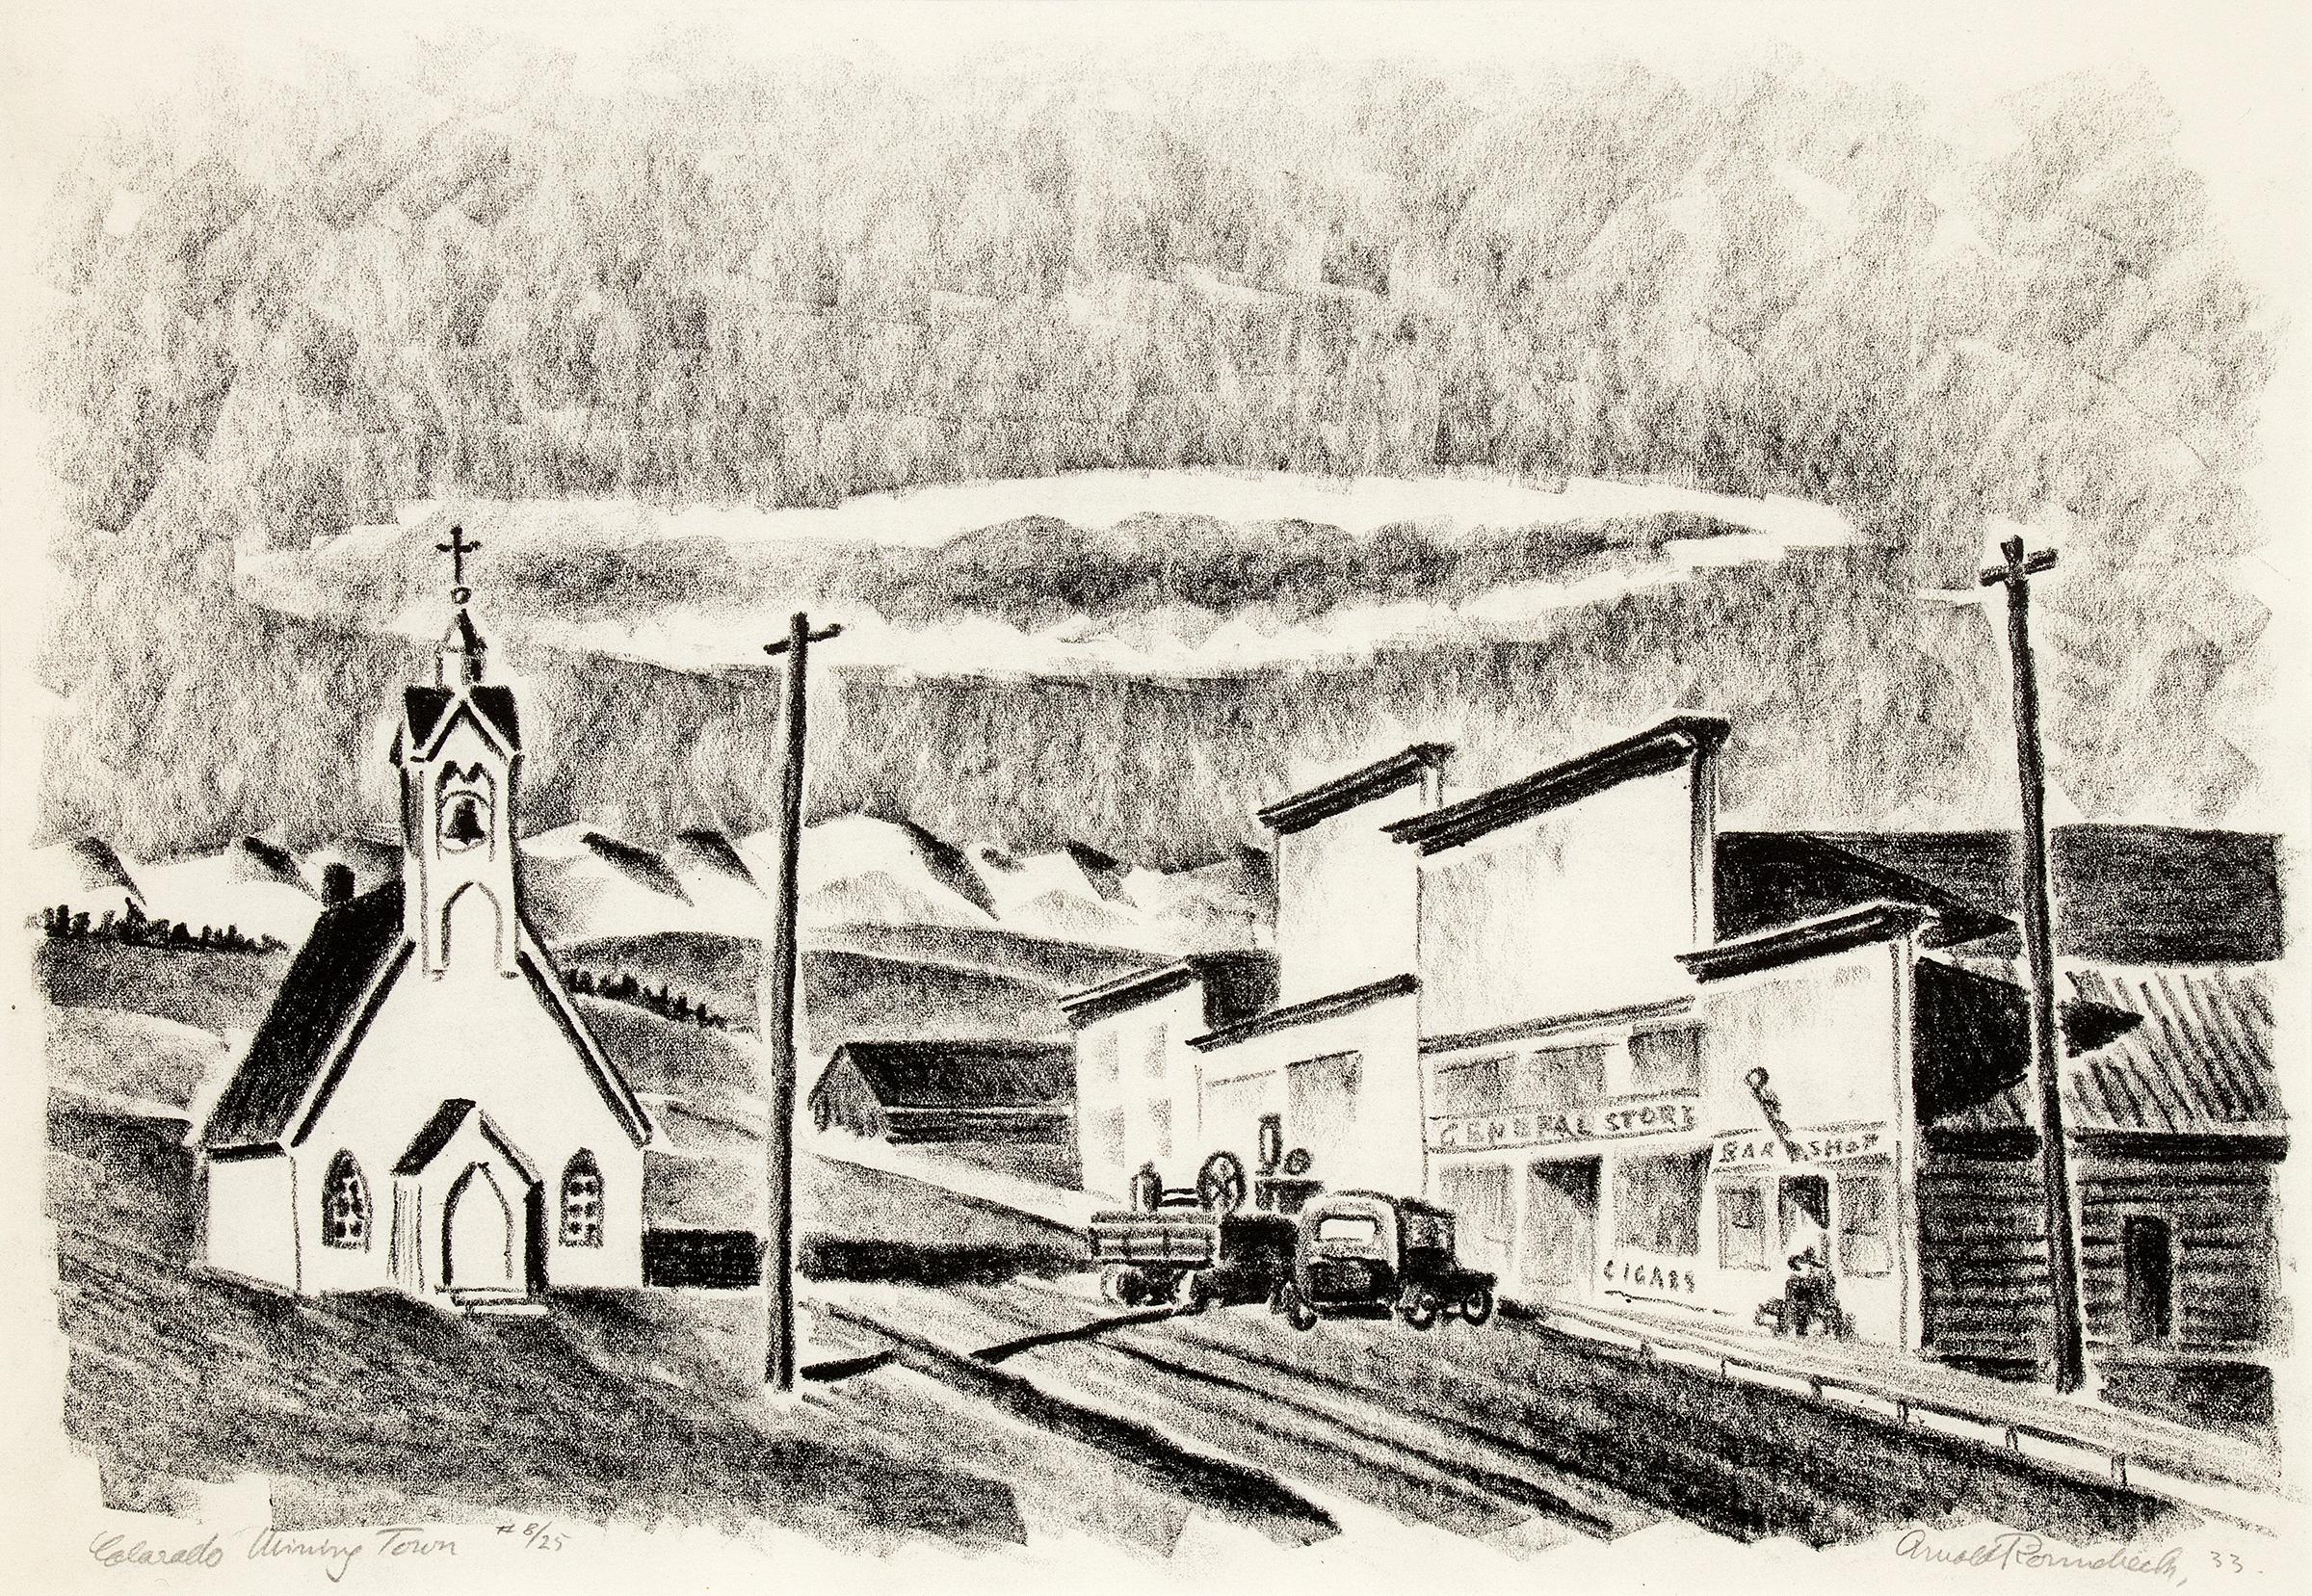 Colorado Mining Town, Fairplay, 1930s Mountain Landscape with Church - Print by Arnold Ronnebeck